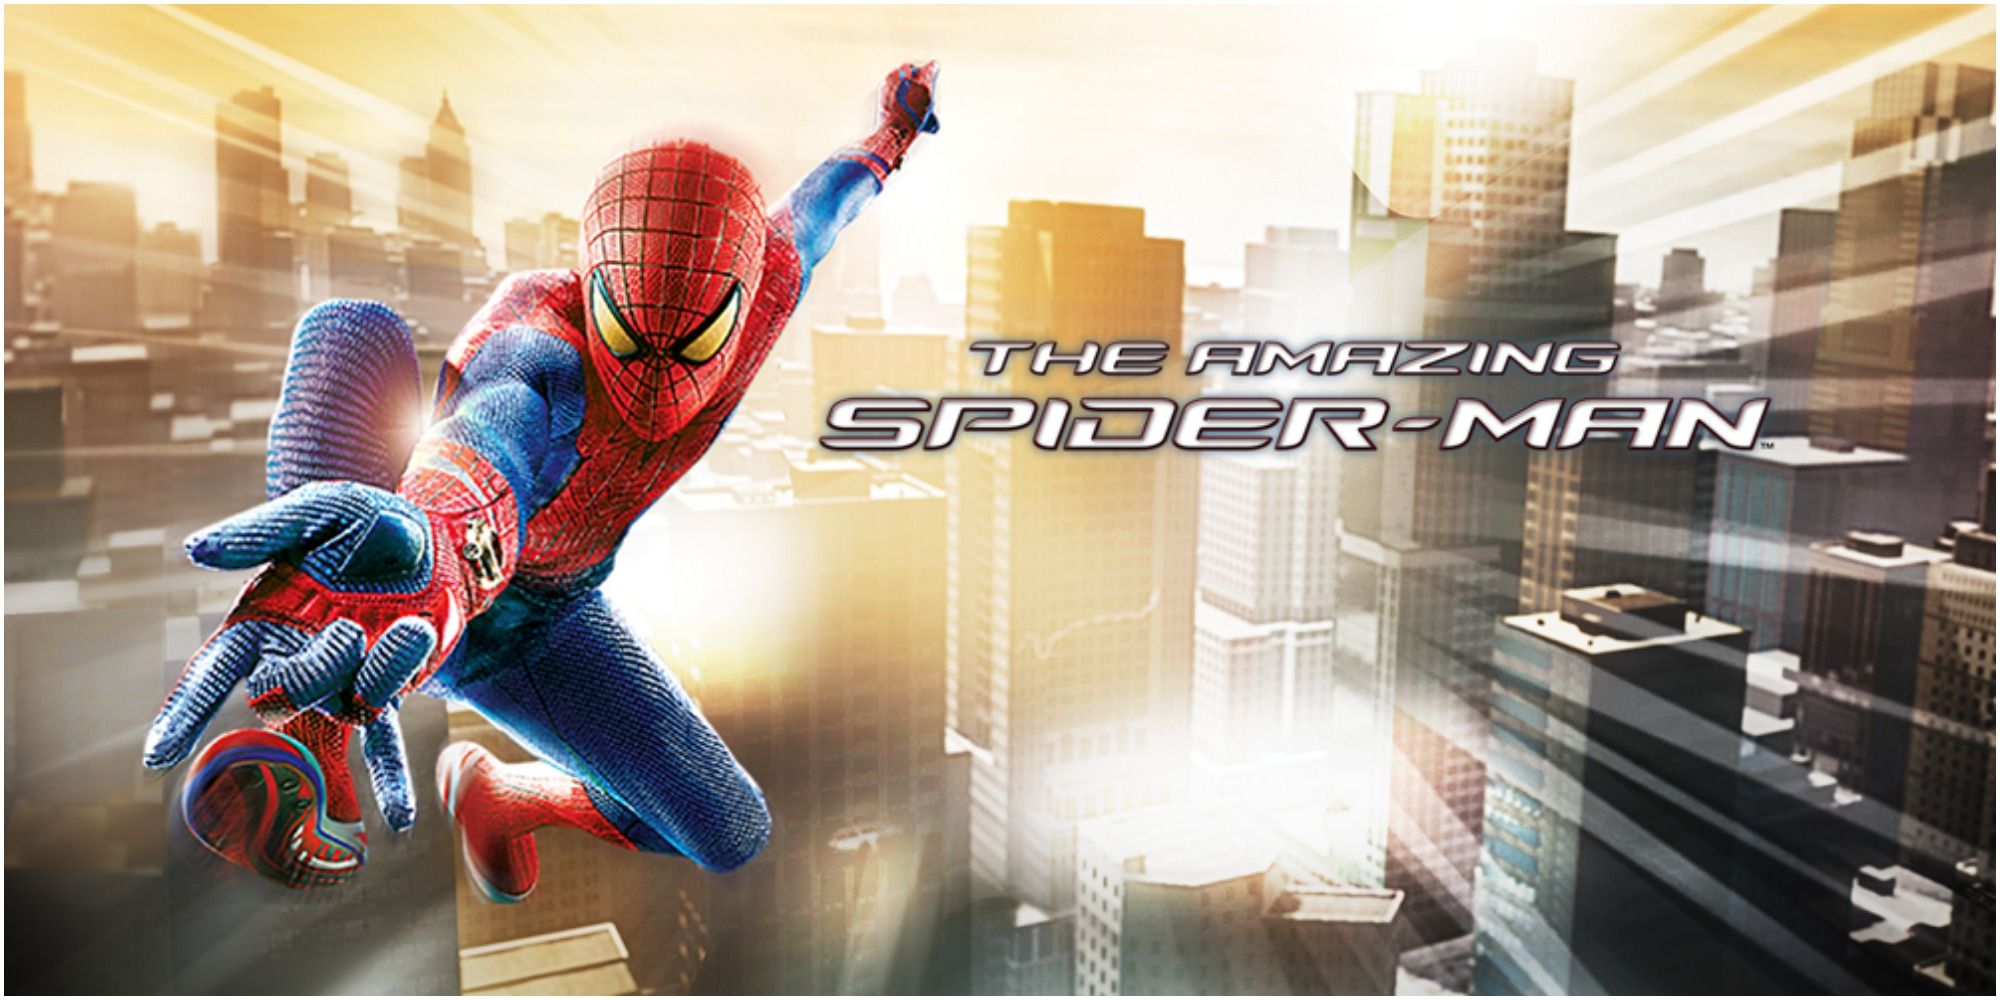 Spider-Man swinging through New York on the cover of the movie tie-in game Amazing Spider-Man